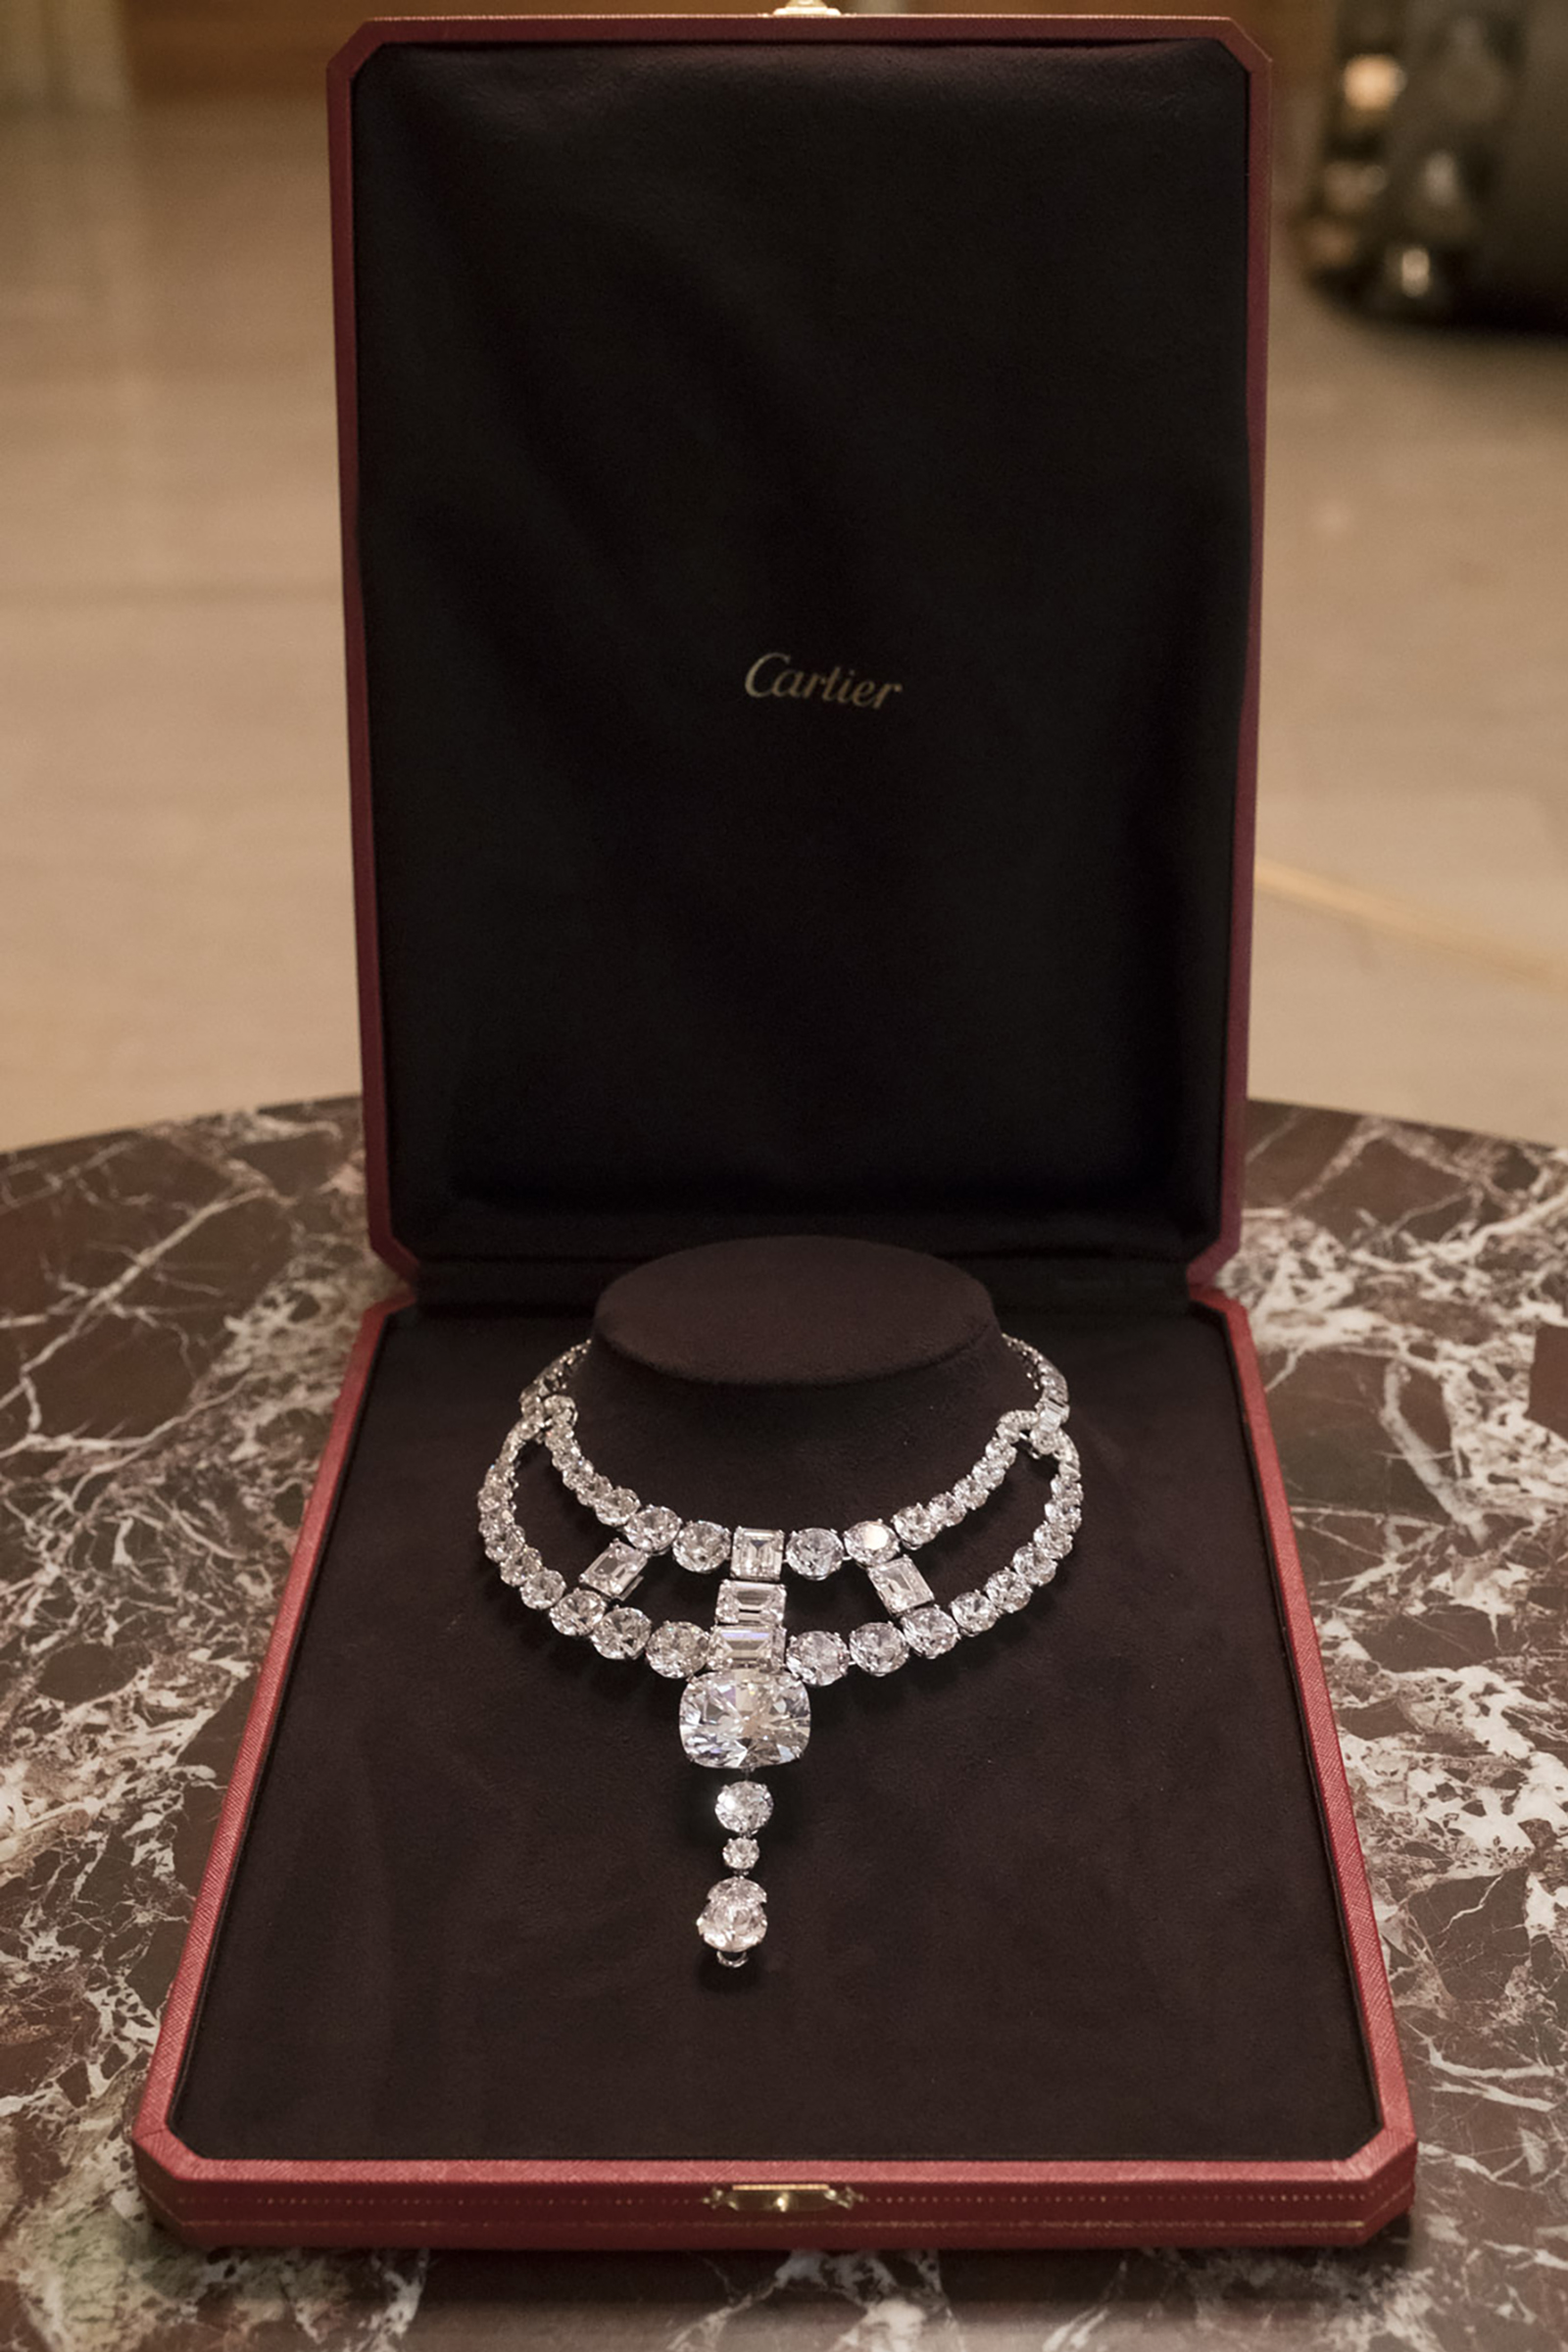 the most expensive cartier necklace